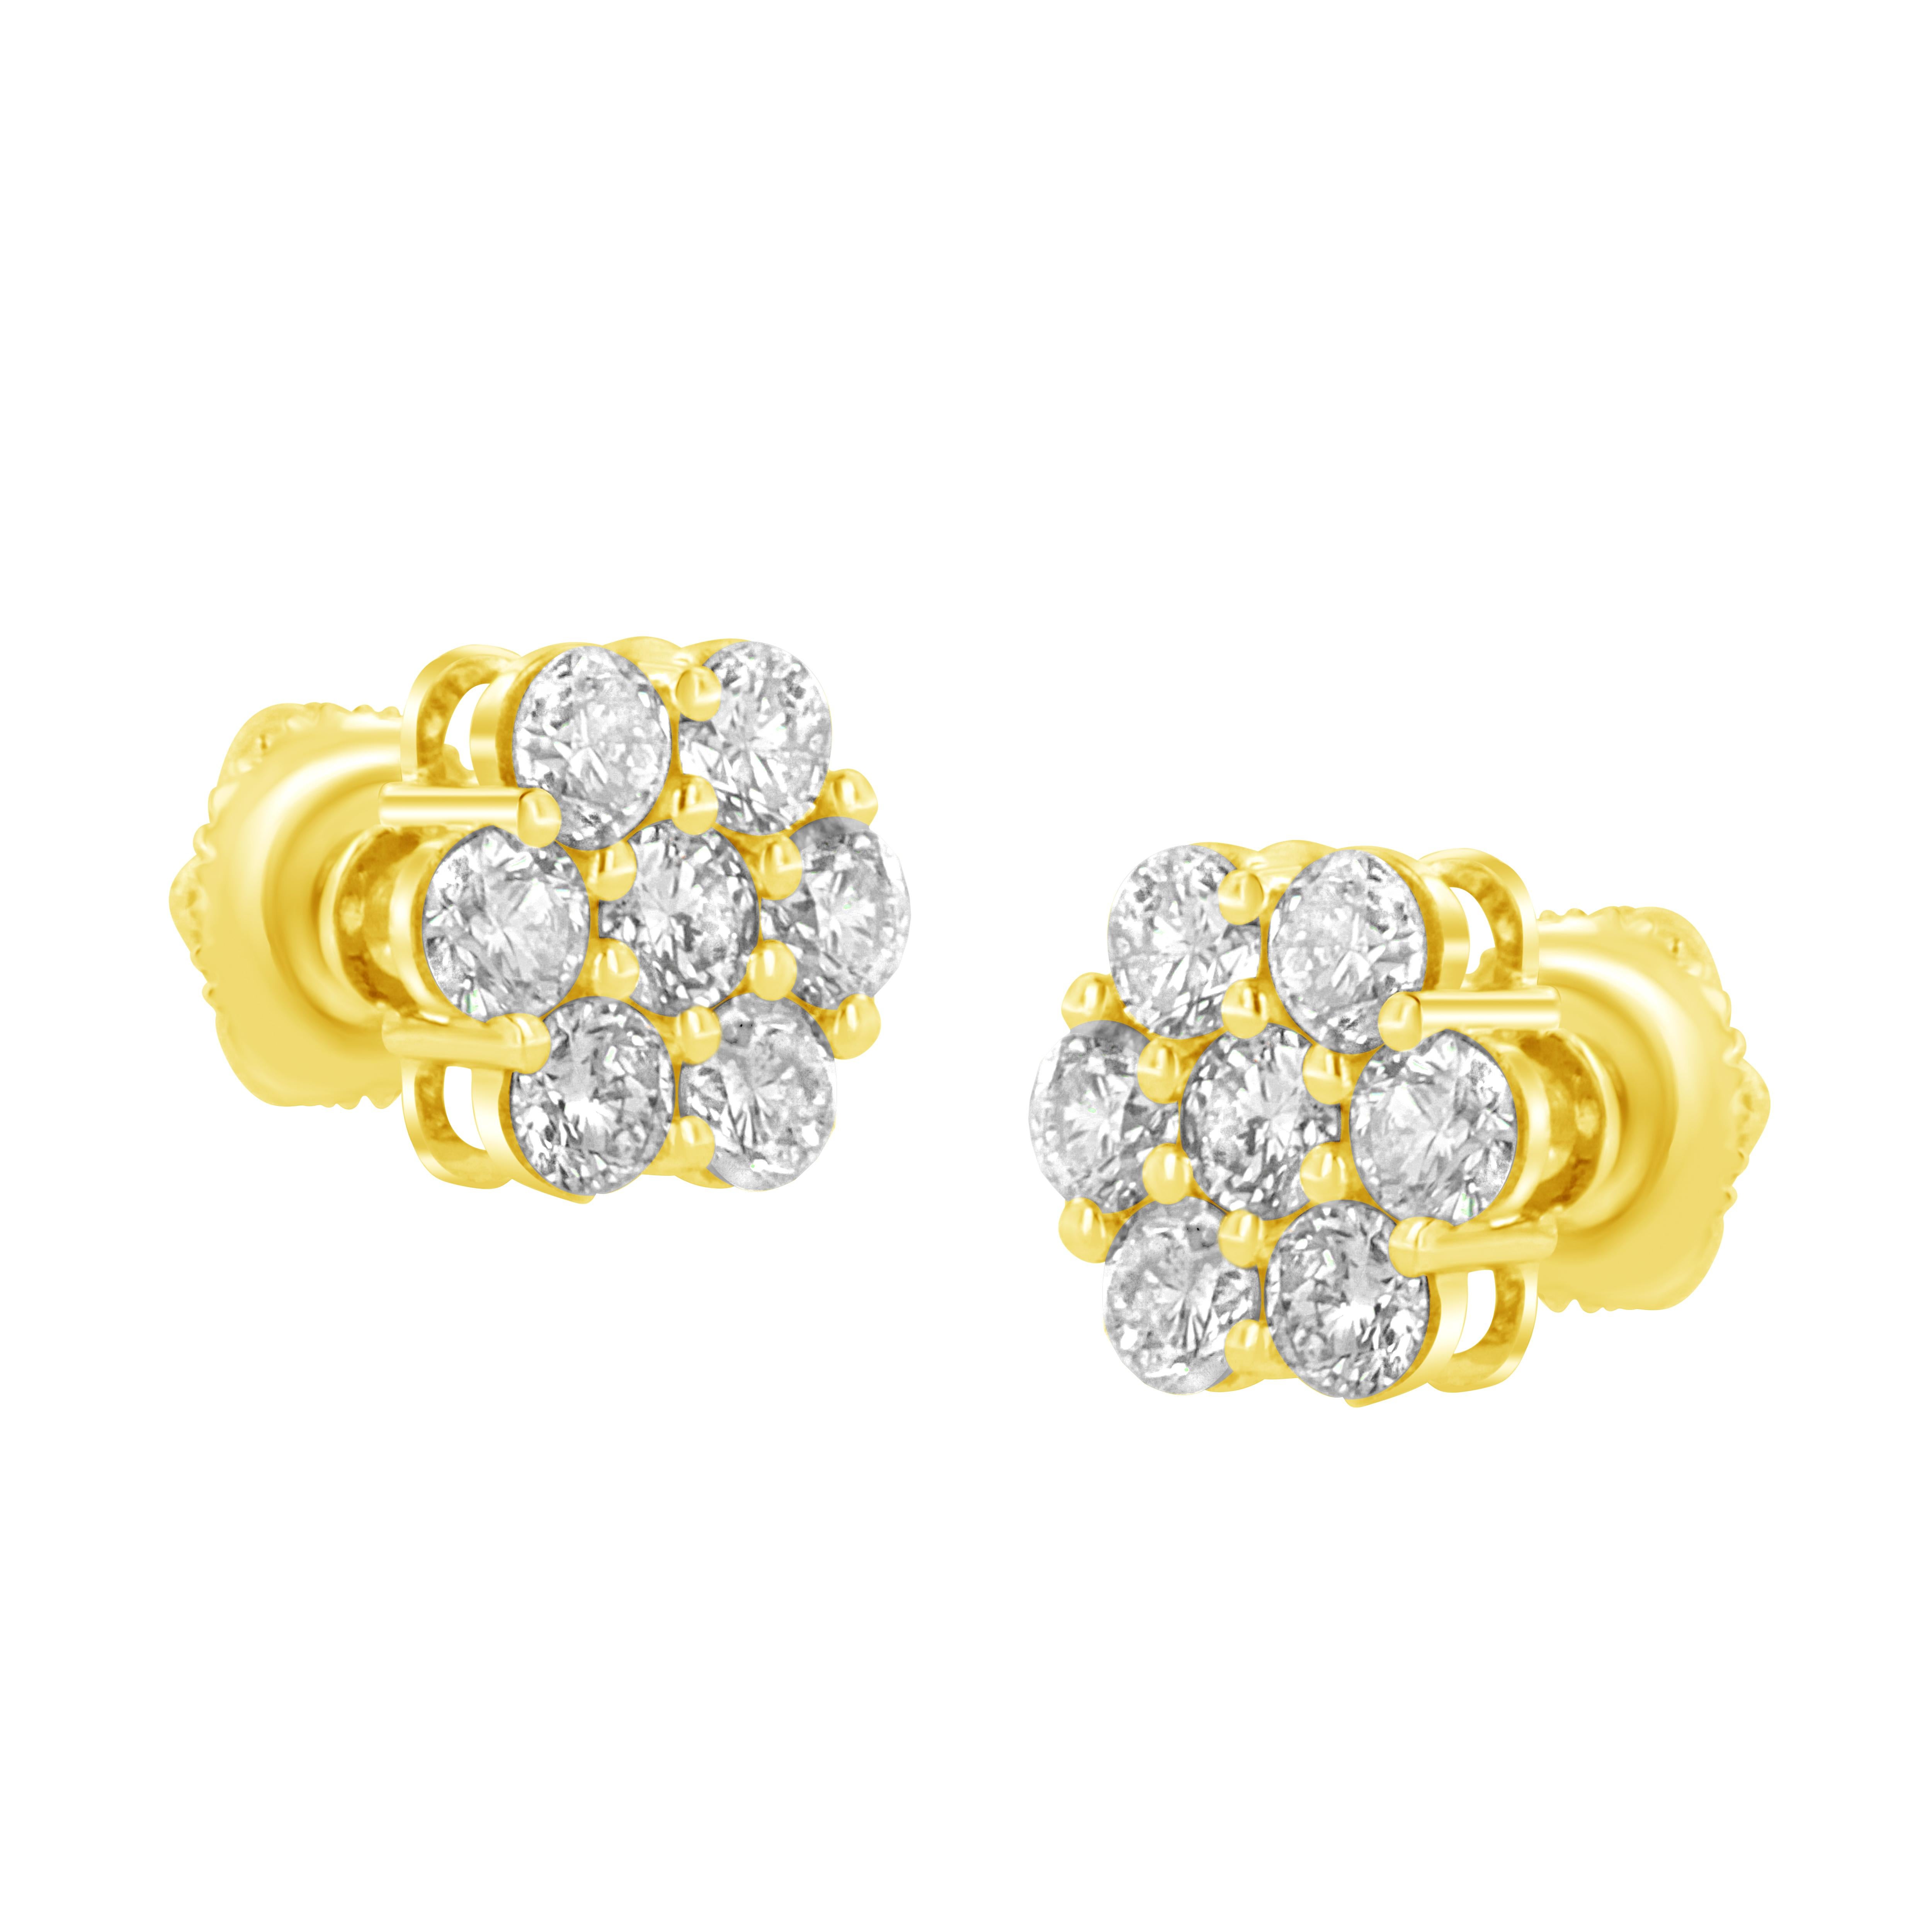 Contemporary 14K Yellow Gold 1.0 Carat Diamond Flower Earrings For Sale